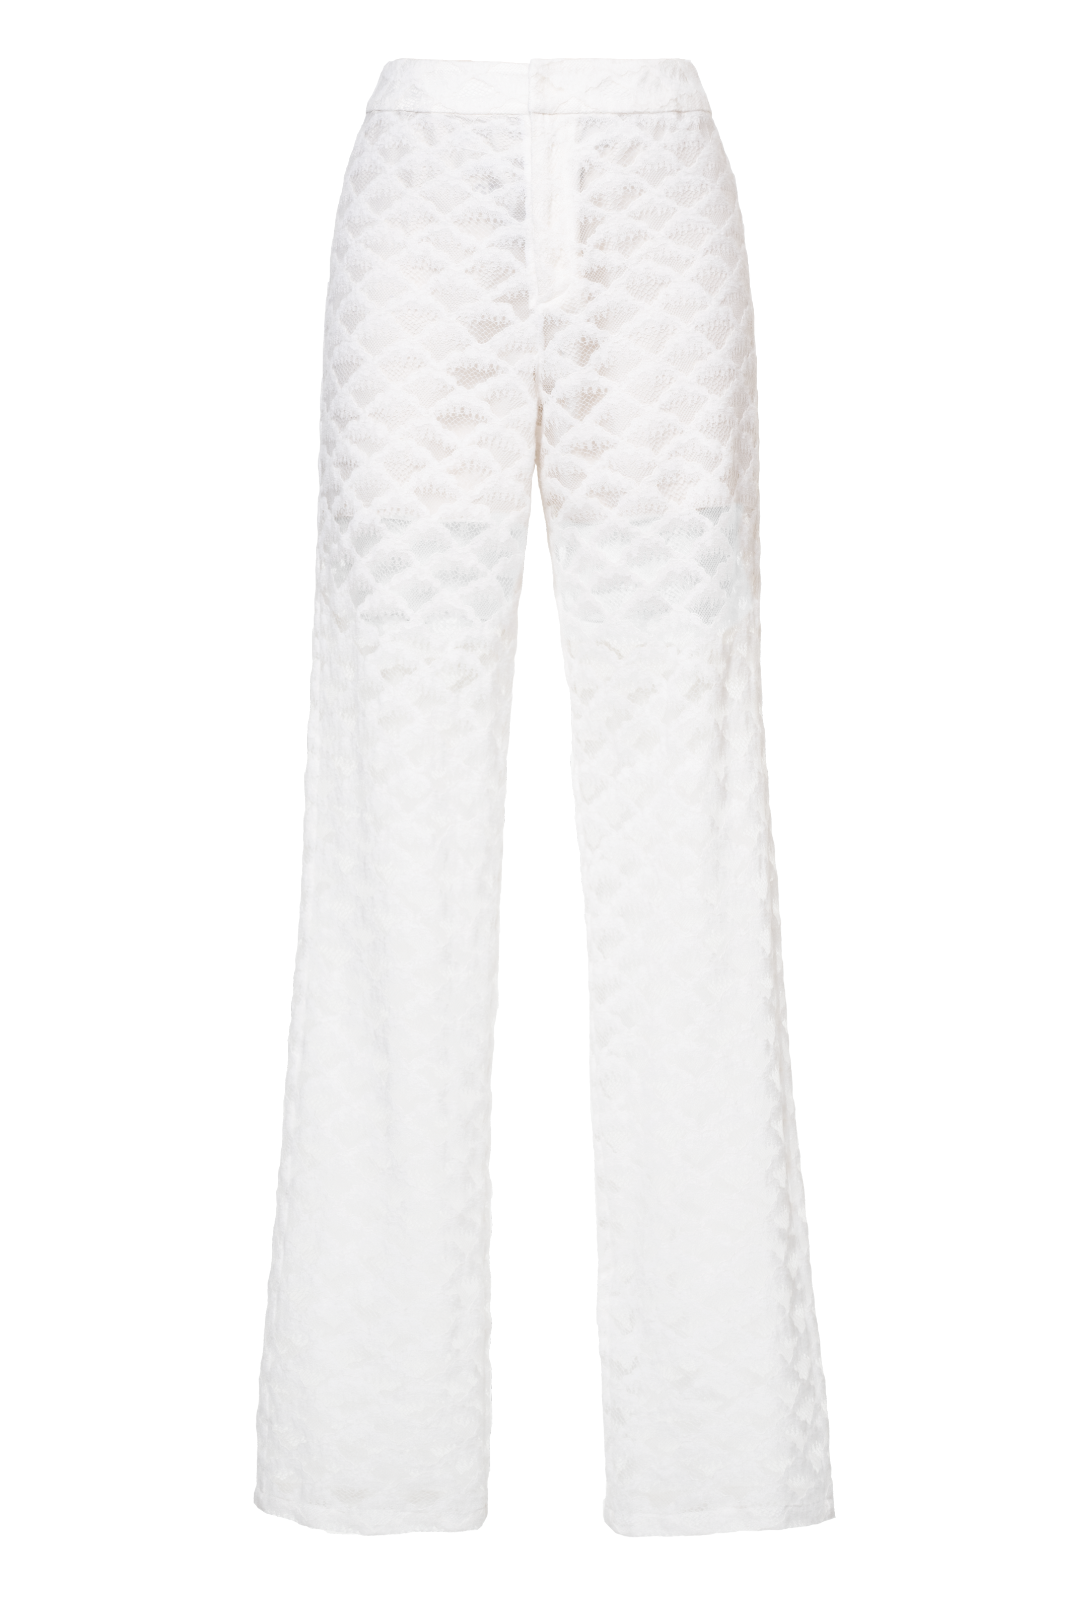 White Lace Trousers